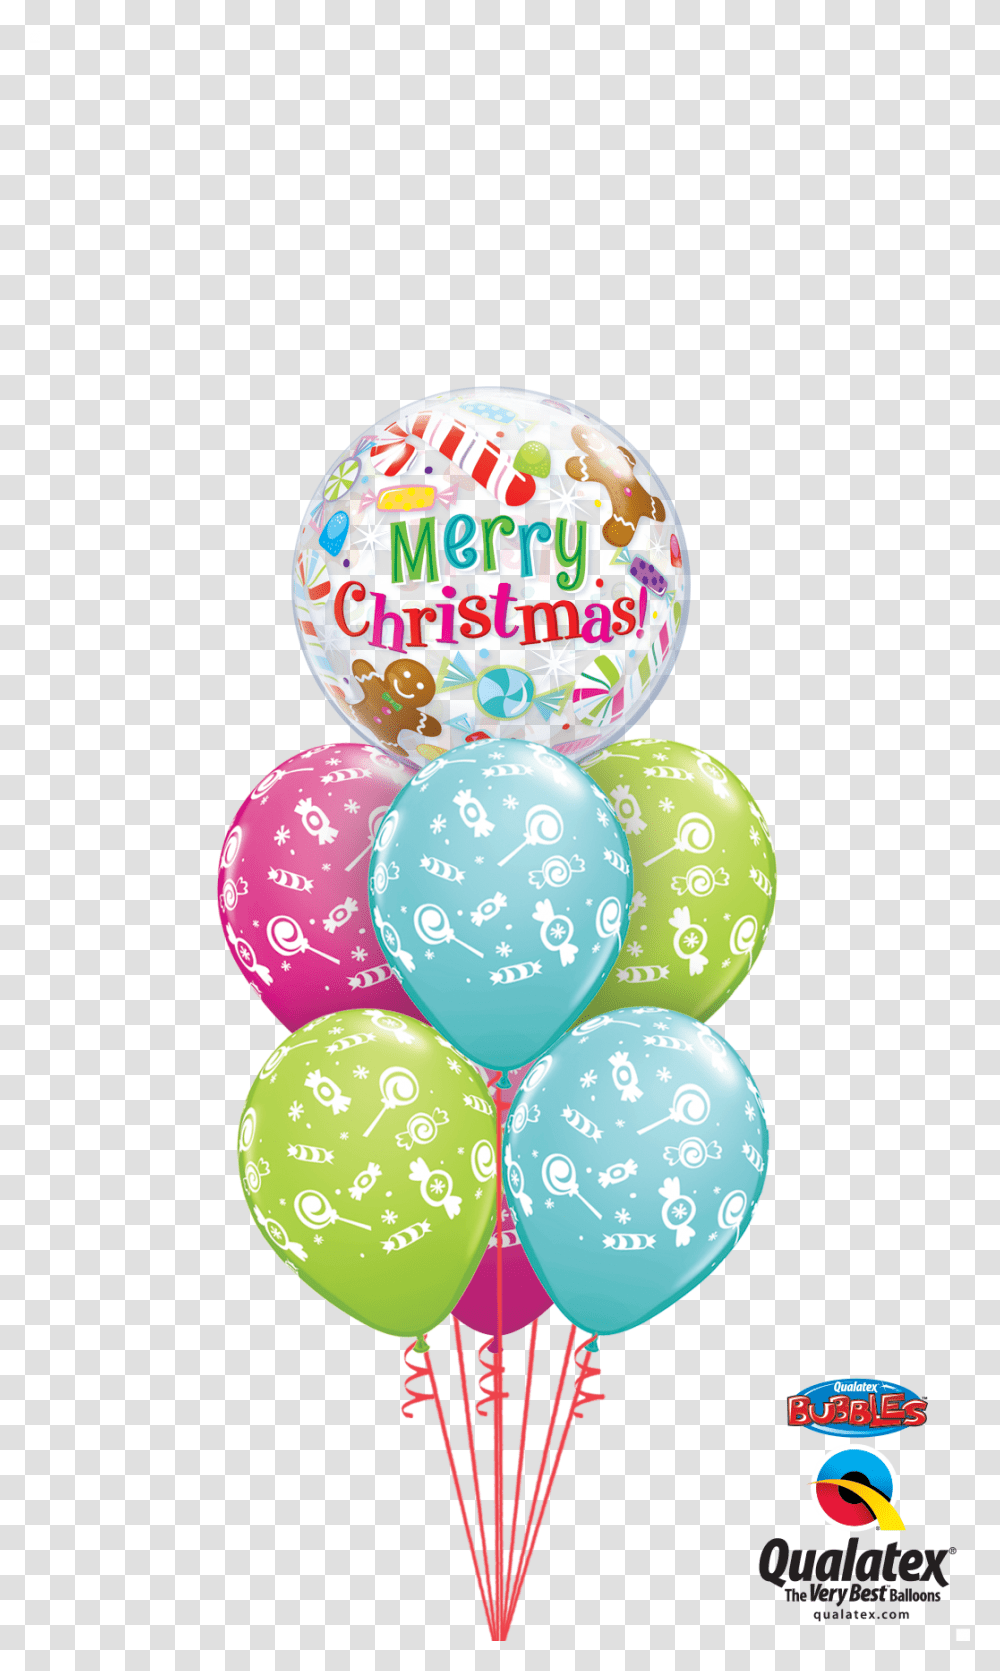 Merry Christmas Bubble Merry Christmas Balloons Transparent Png